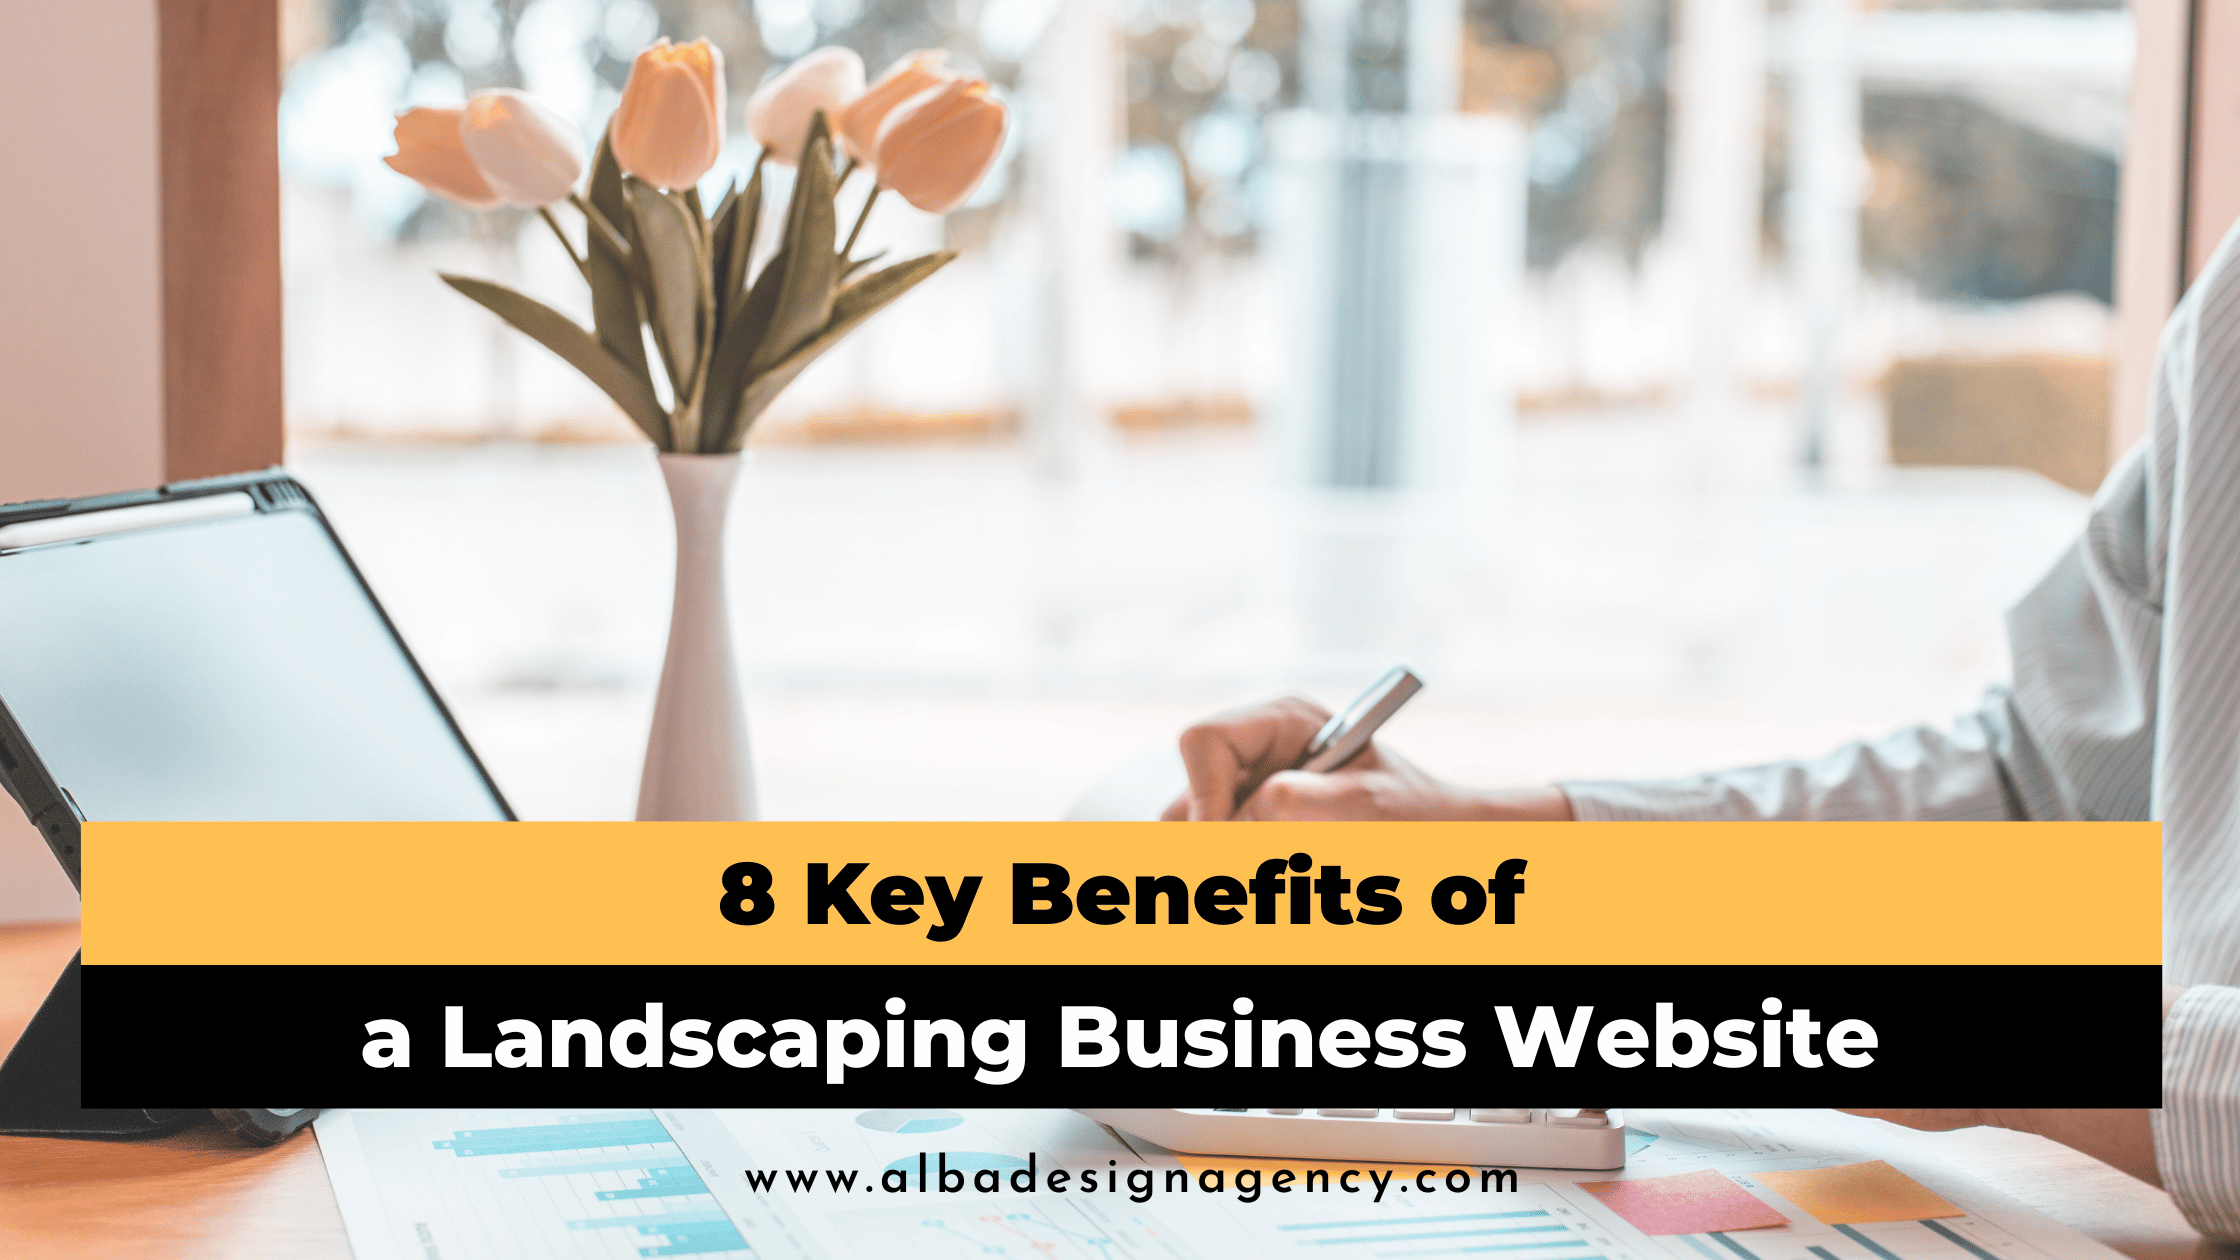 Landscaping-business